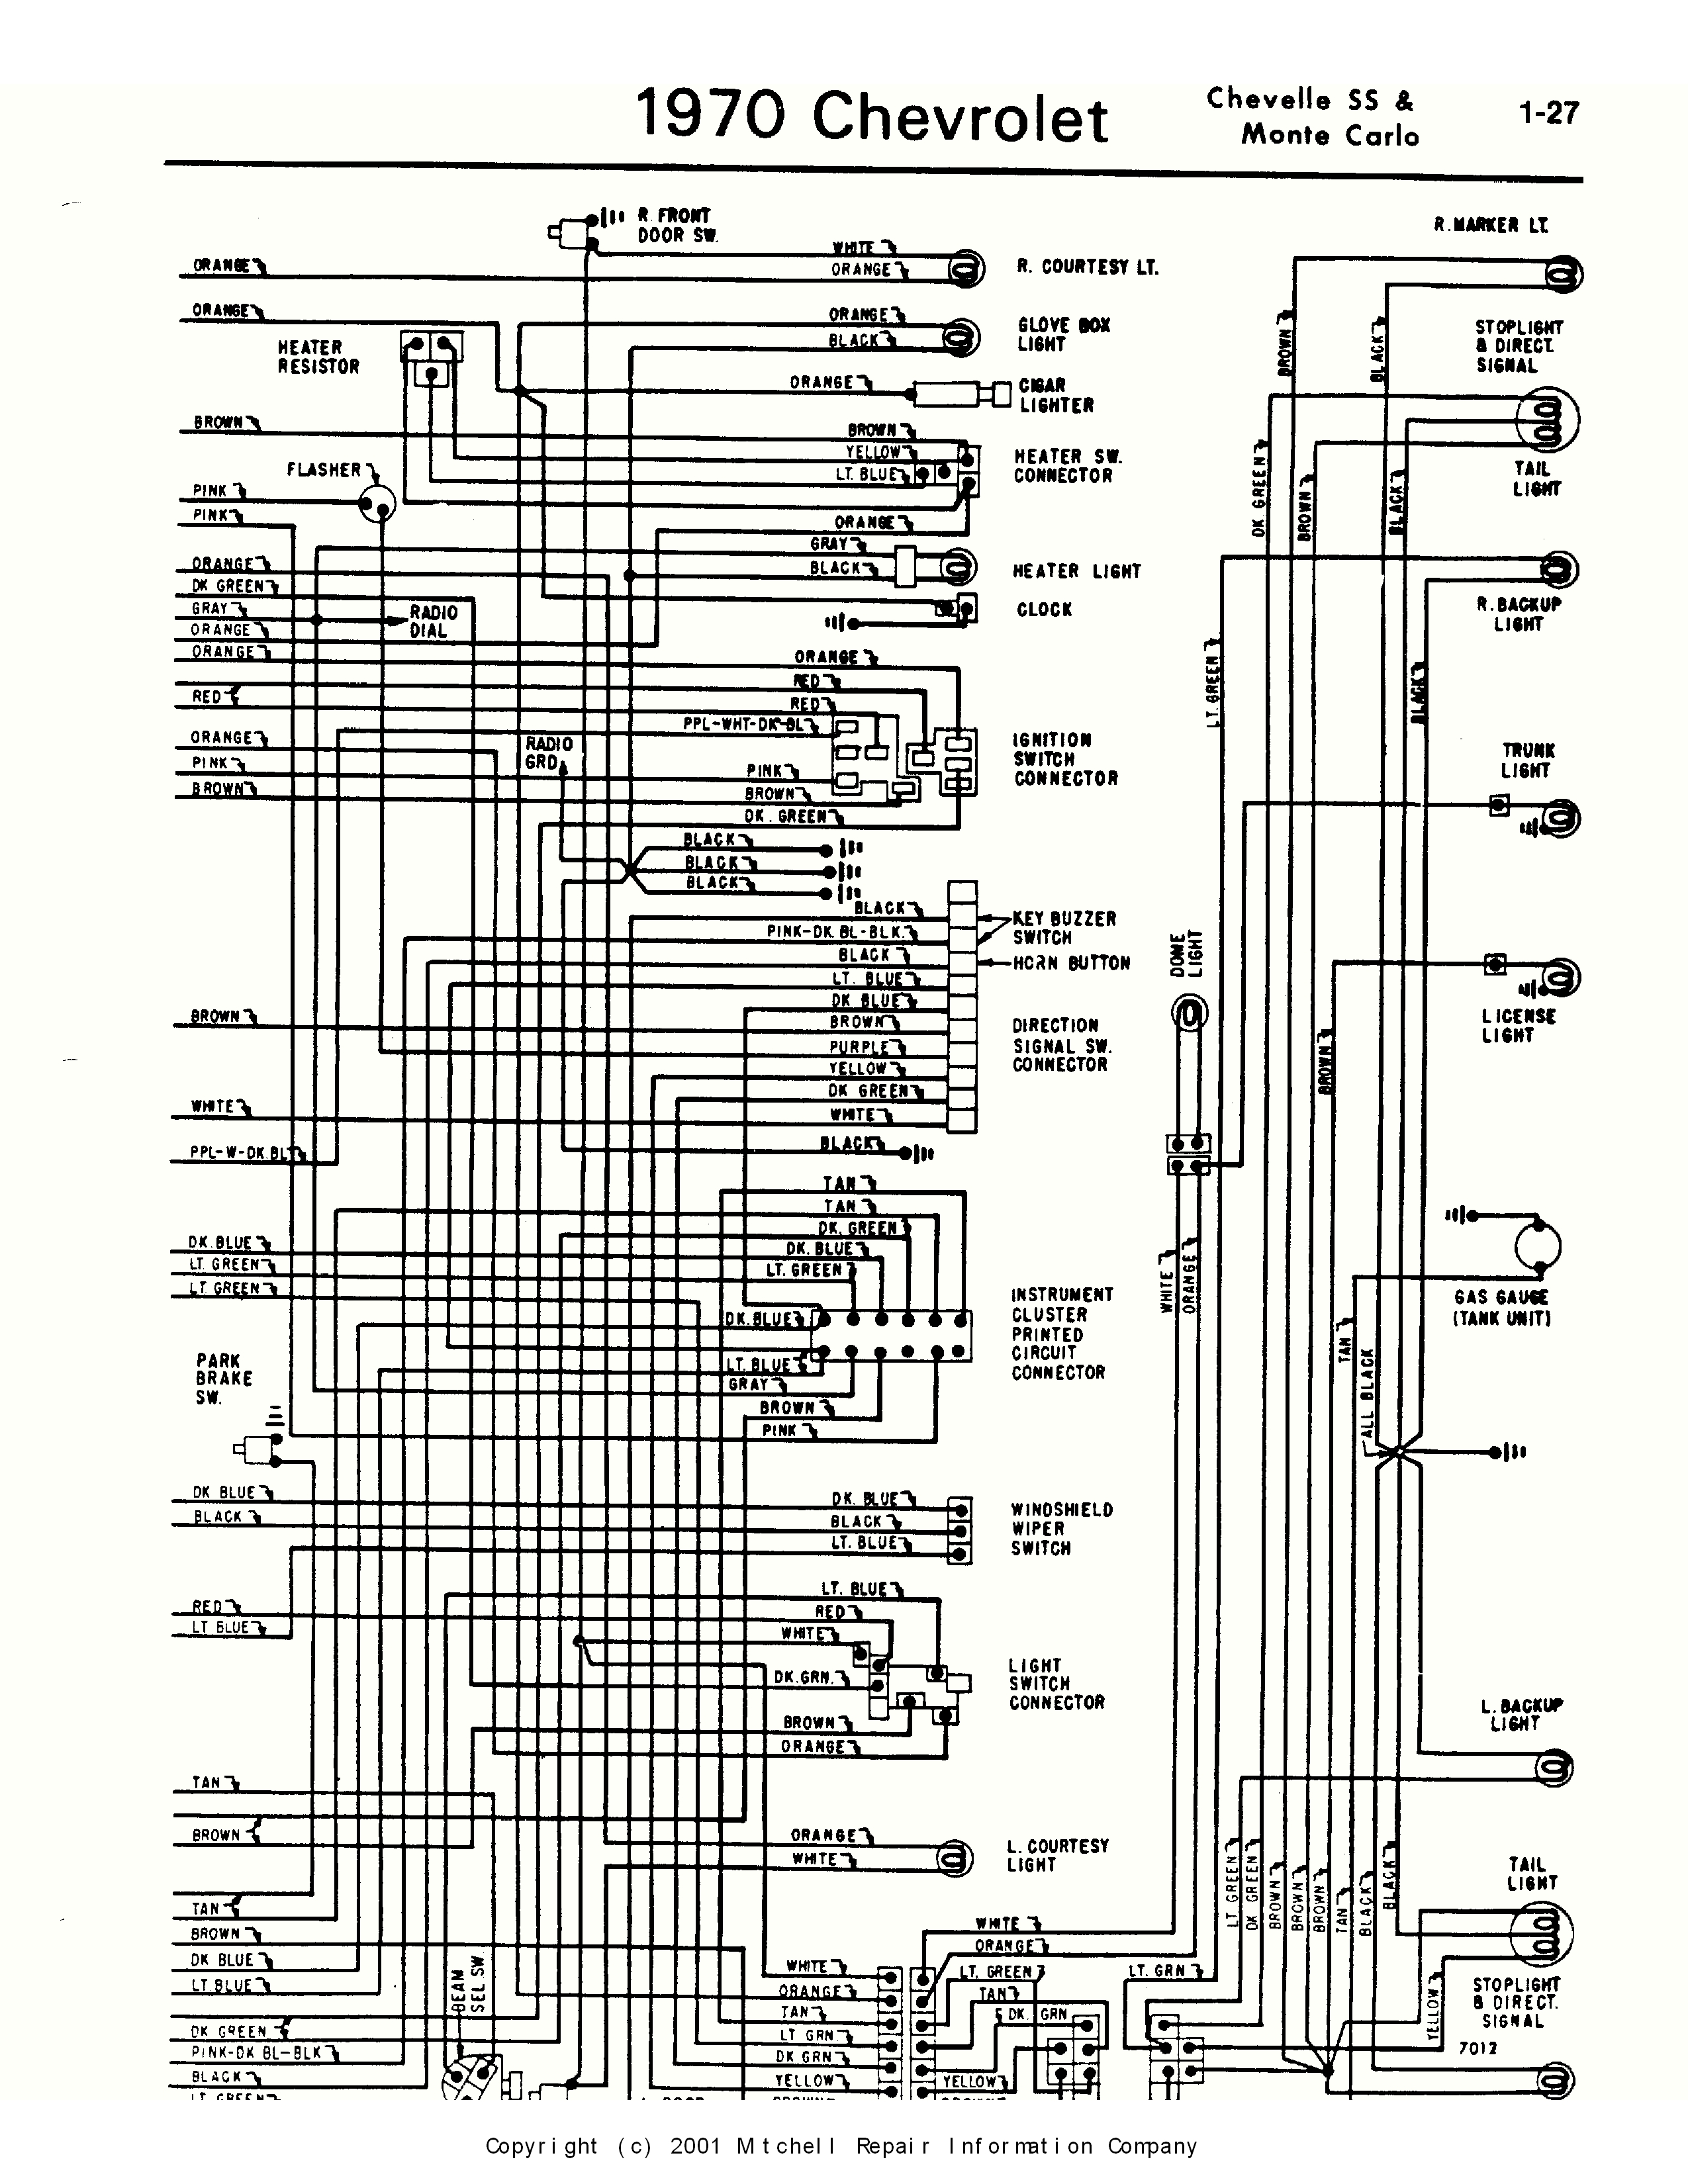 1970 Chevelle Ignition Switch Wiring Diagram from www.wiring-wizard.com